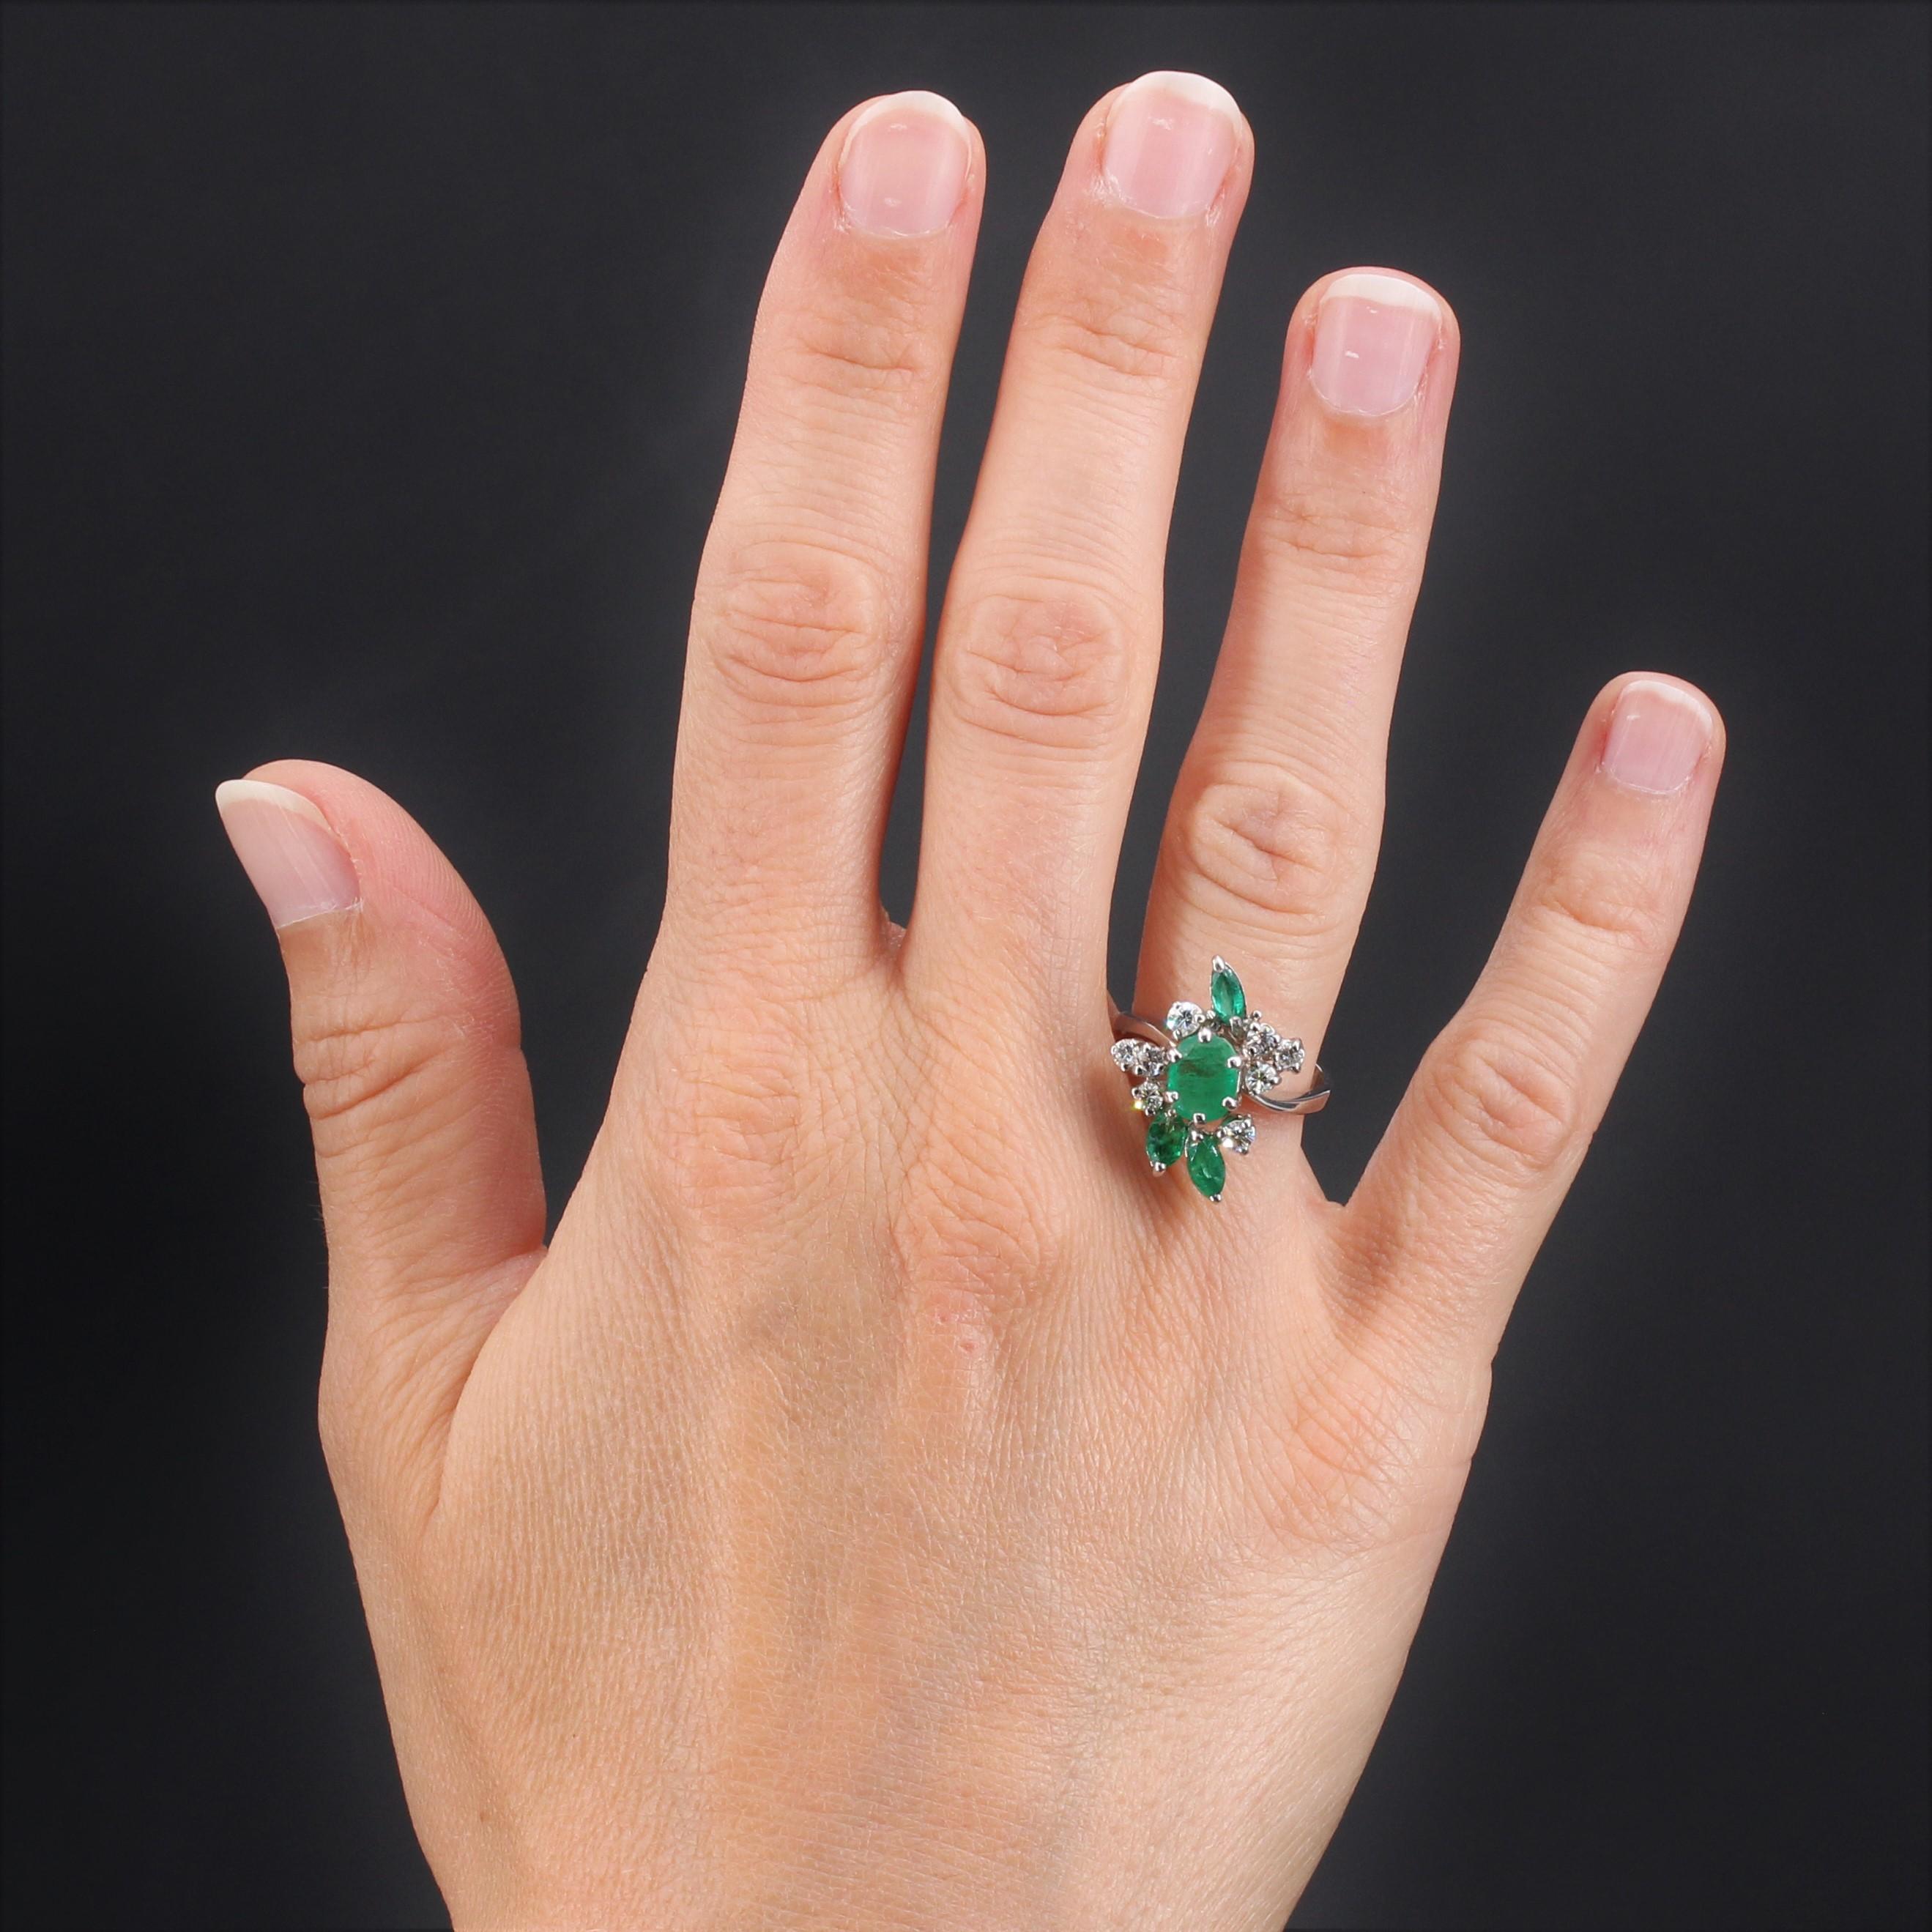 Ring in 18 carats white gold, head of eagle hallmark.
It comes straight from the 1970s, this splendid vintage ring is set with claws of an emerald oval surrounded by 8 modern brilliant cut diamonds and 3 emeralds shuttle.
Total diamond weight: about